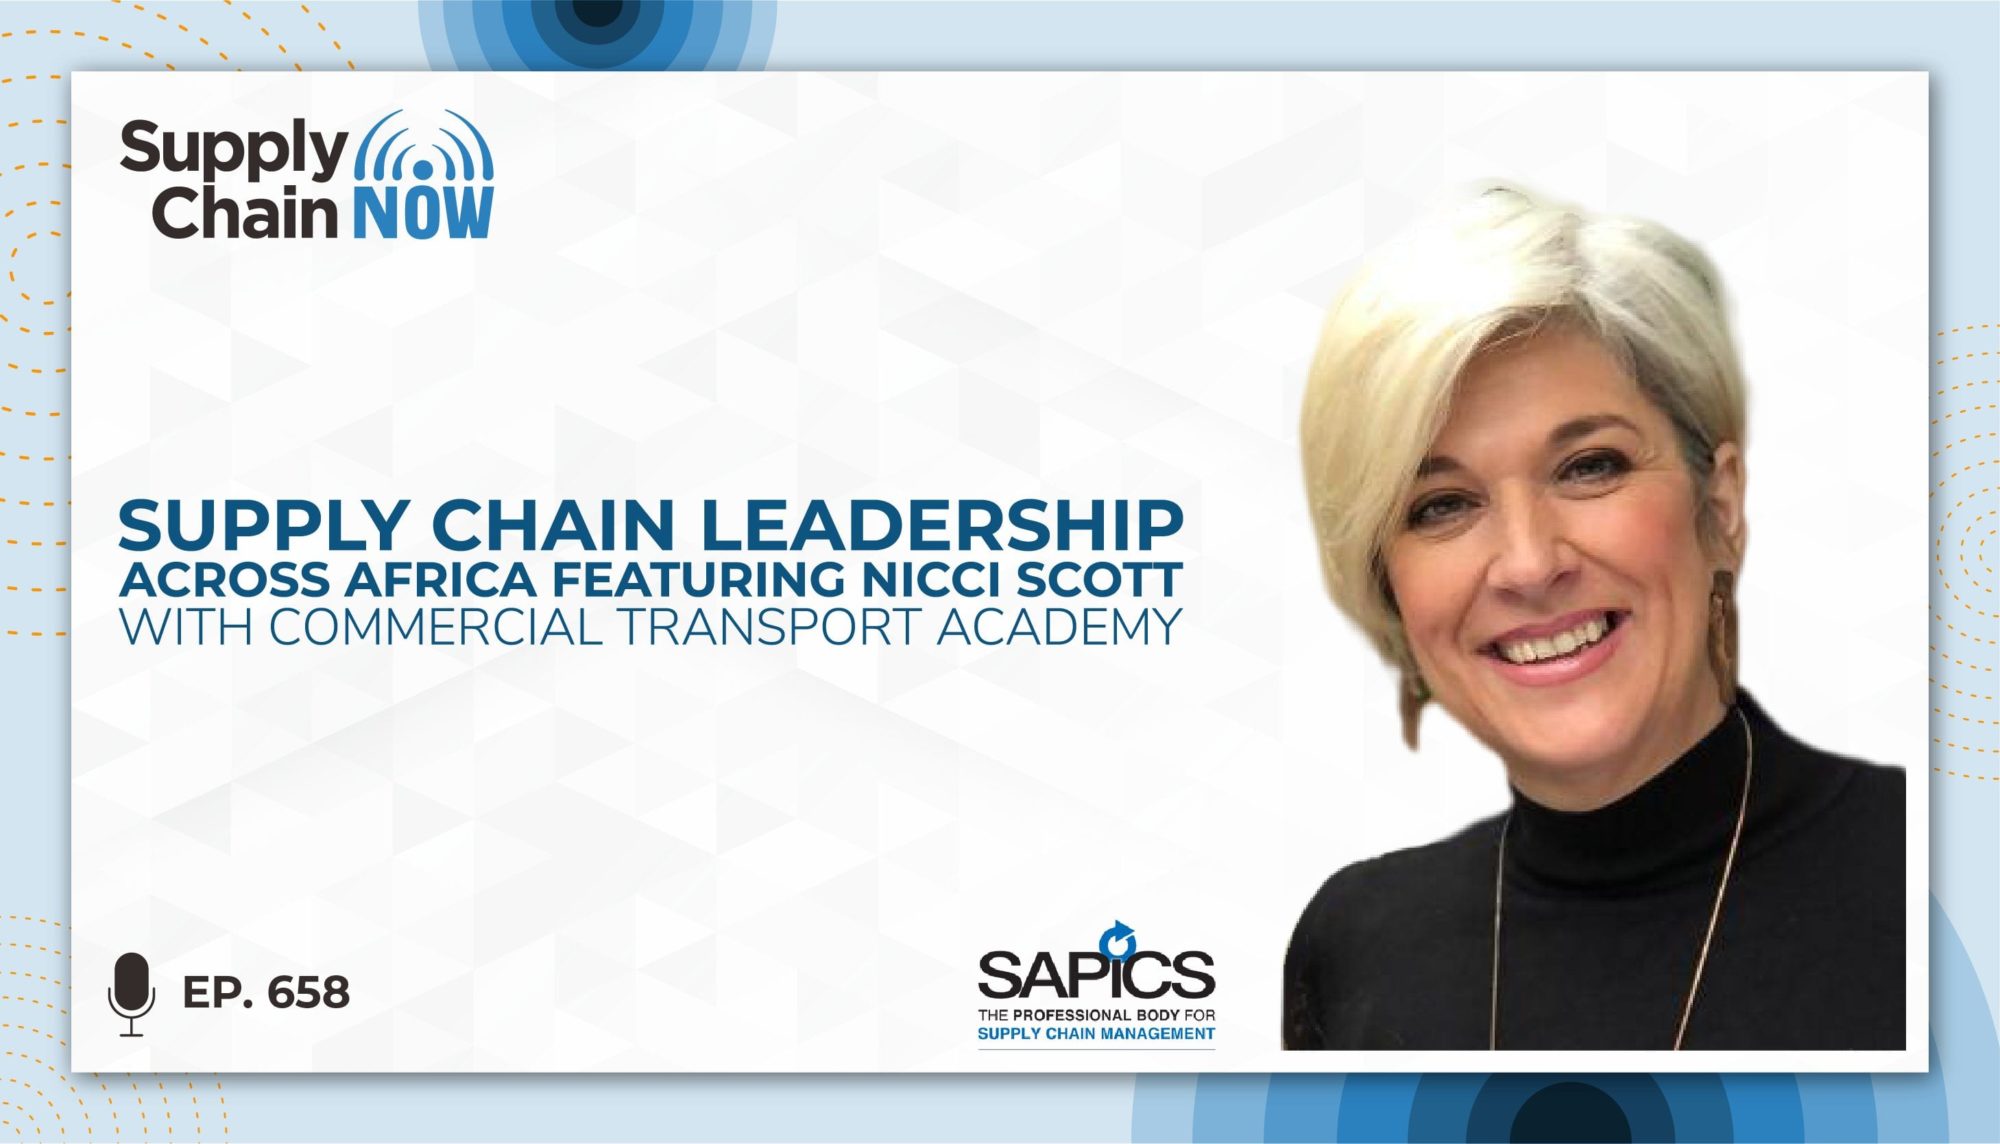 Supply Chain Leadership Across Africa Featuring Nicci Scott with Commercial Transport Academy